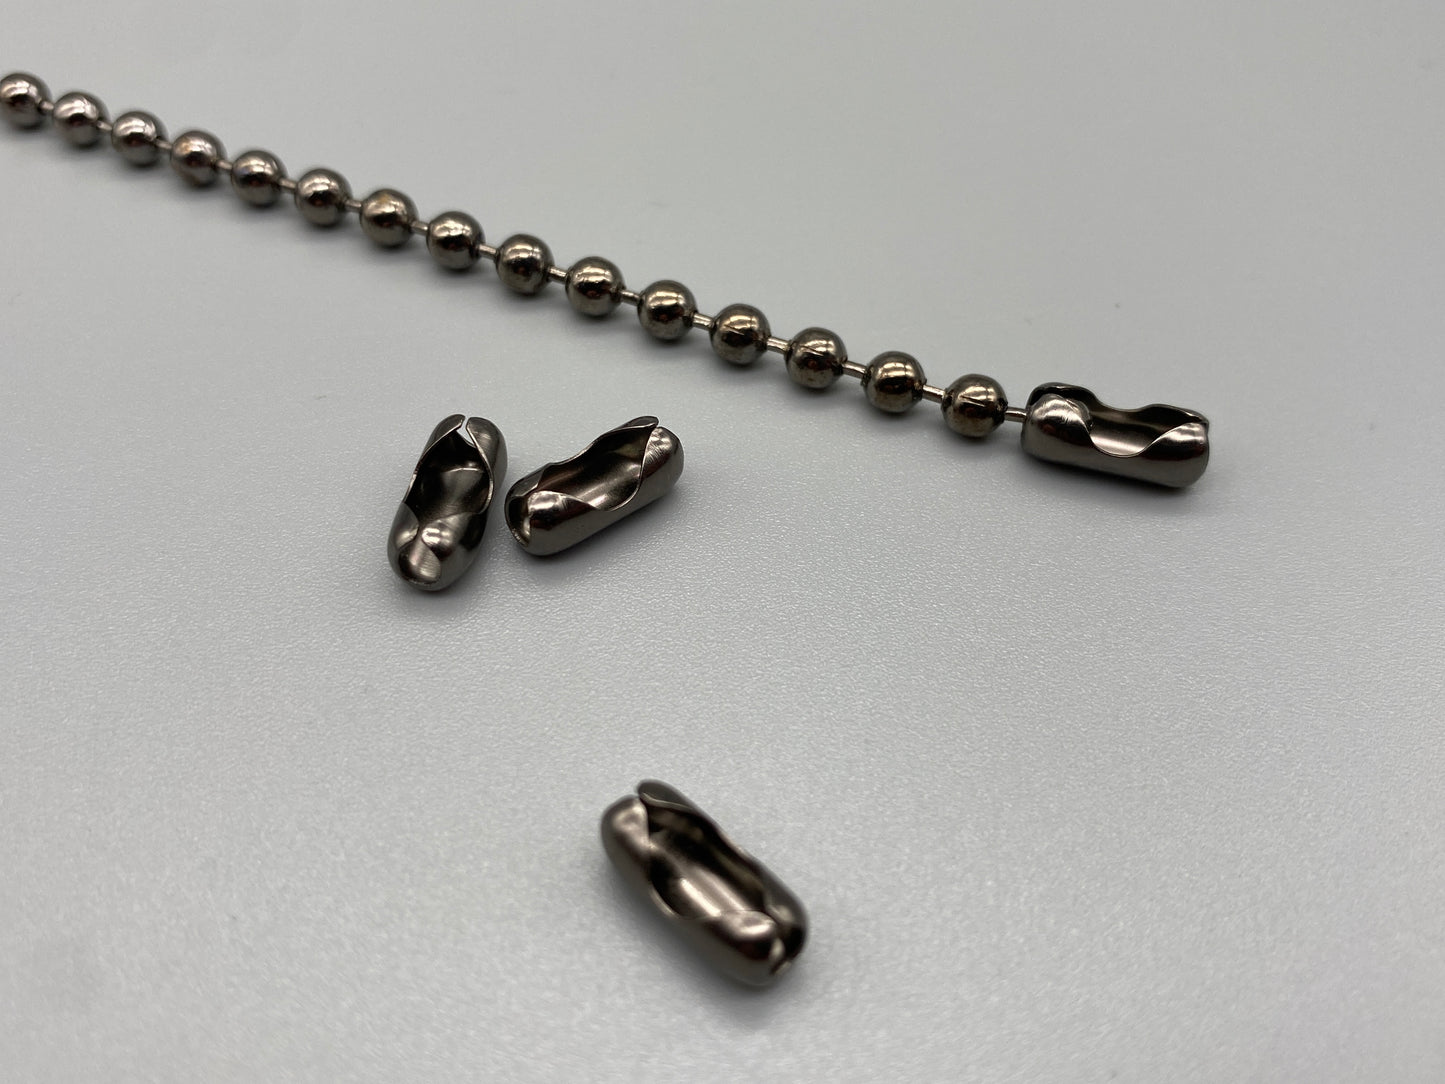 Gunmetal Chain - No.10 Bead Size: 4.5mm + Free Connector